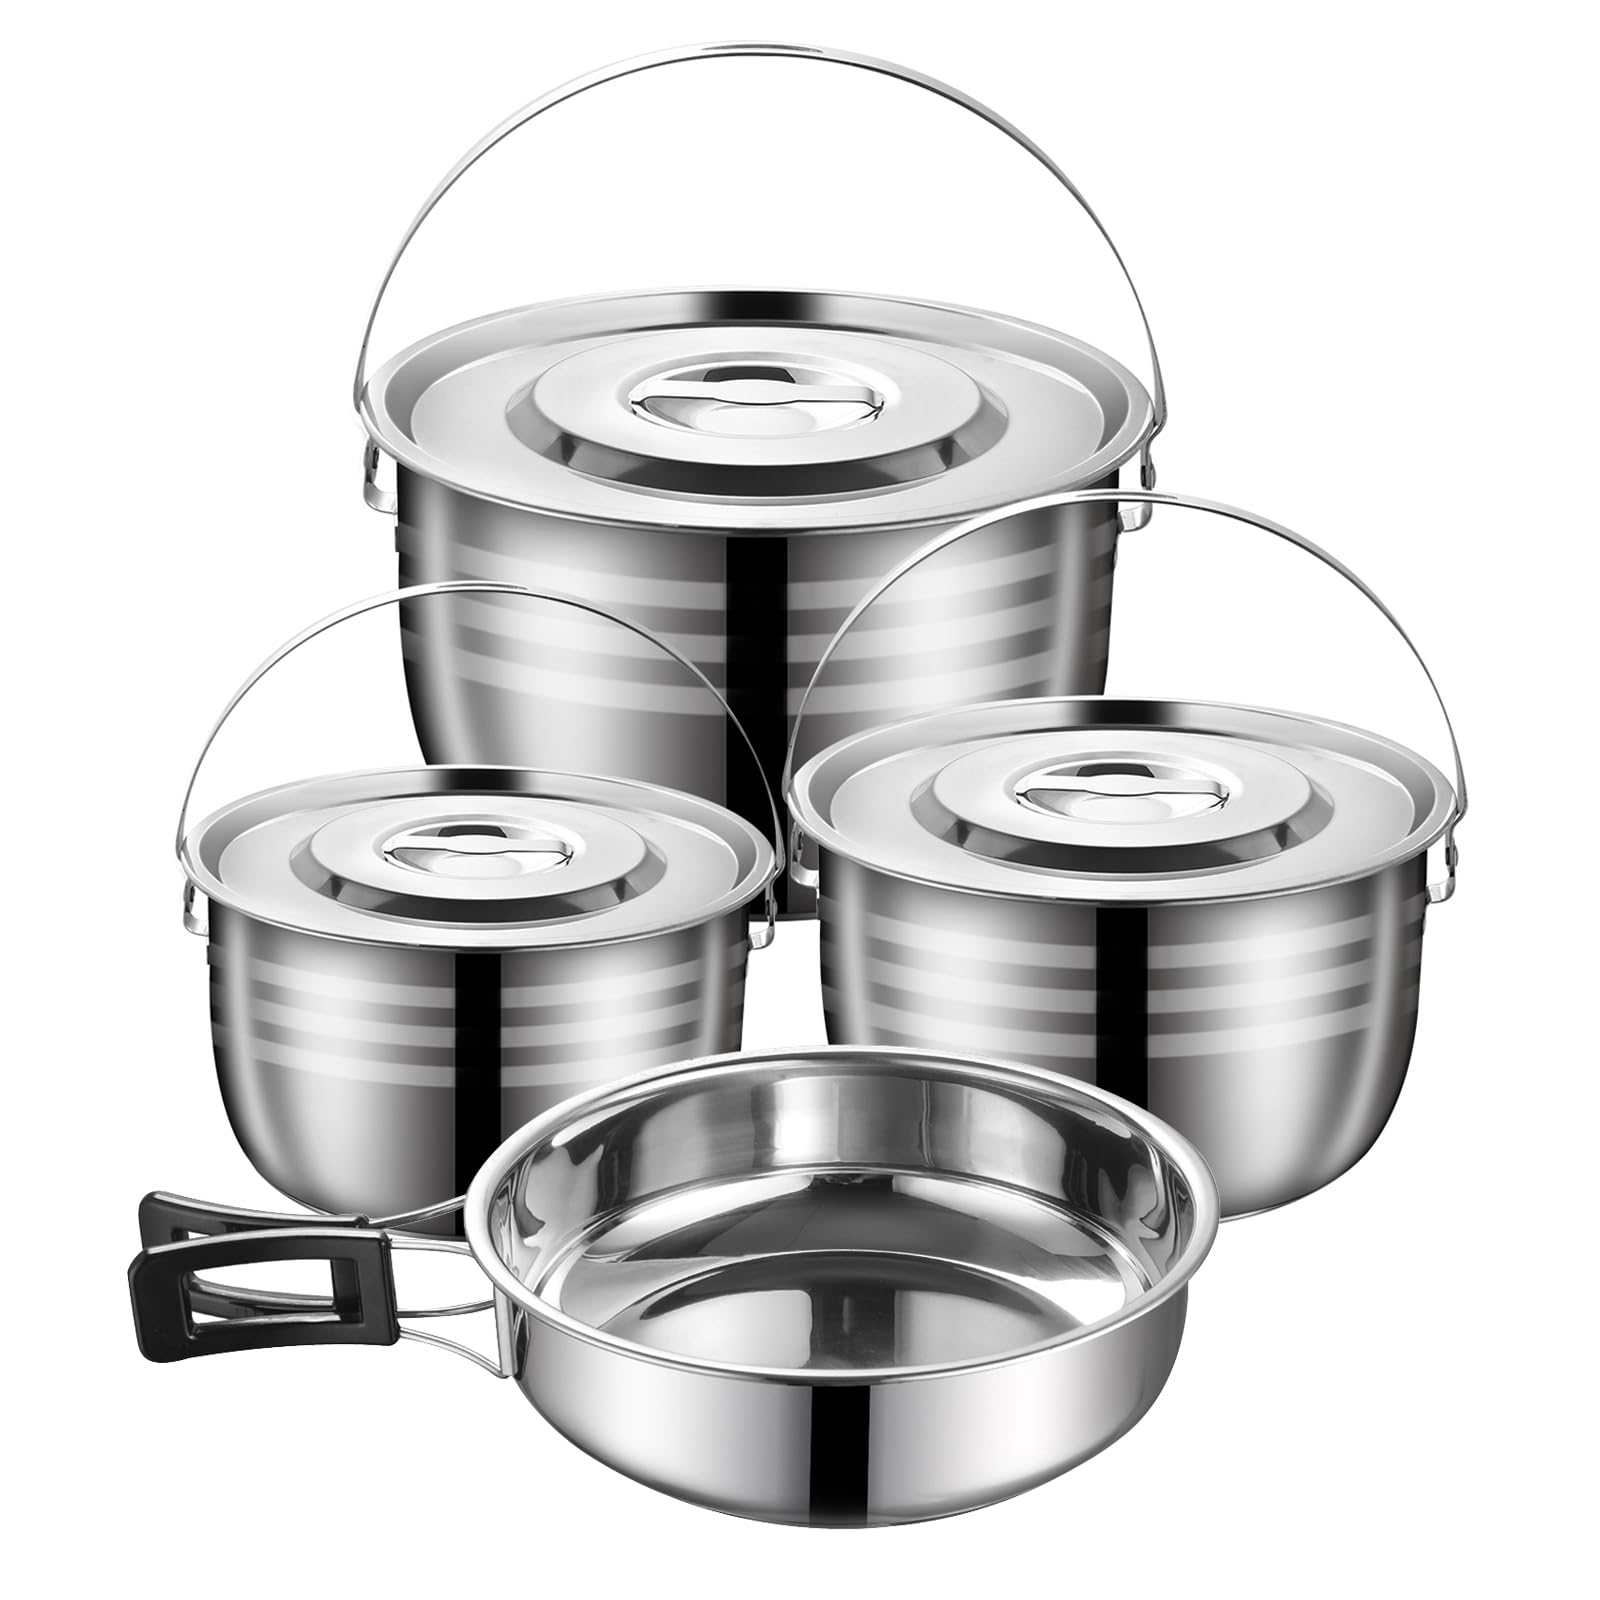 Camping Cooking Set - Portable Mess Kit 304 Stainless Steel Camping Kitchen SetCamping Pot and Pan Set for Outdoor Cooking